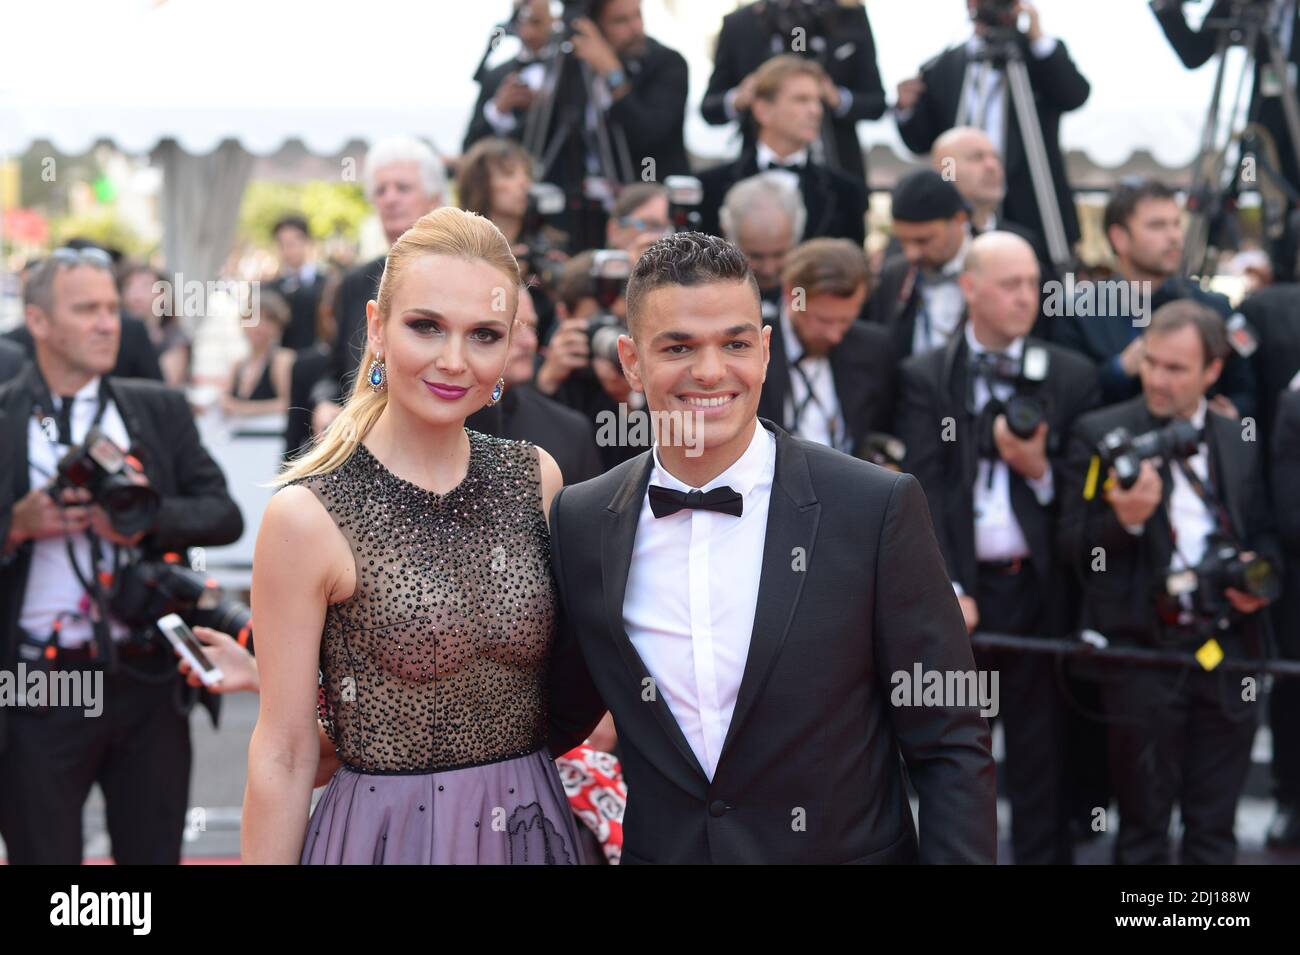 Hatem Ben Arfa and wife attending the screening of 'Loving' at the Palais  Des Festivals in Cannes, France on May 16, 2016, as part of the 69th Cannes  Film Festival. Photo by